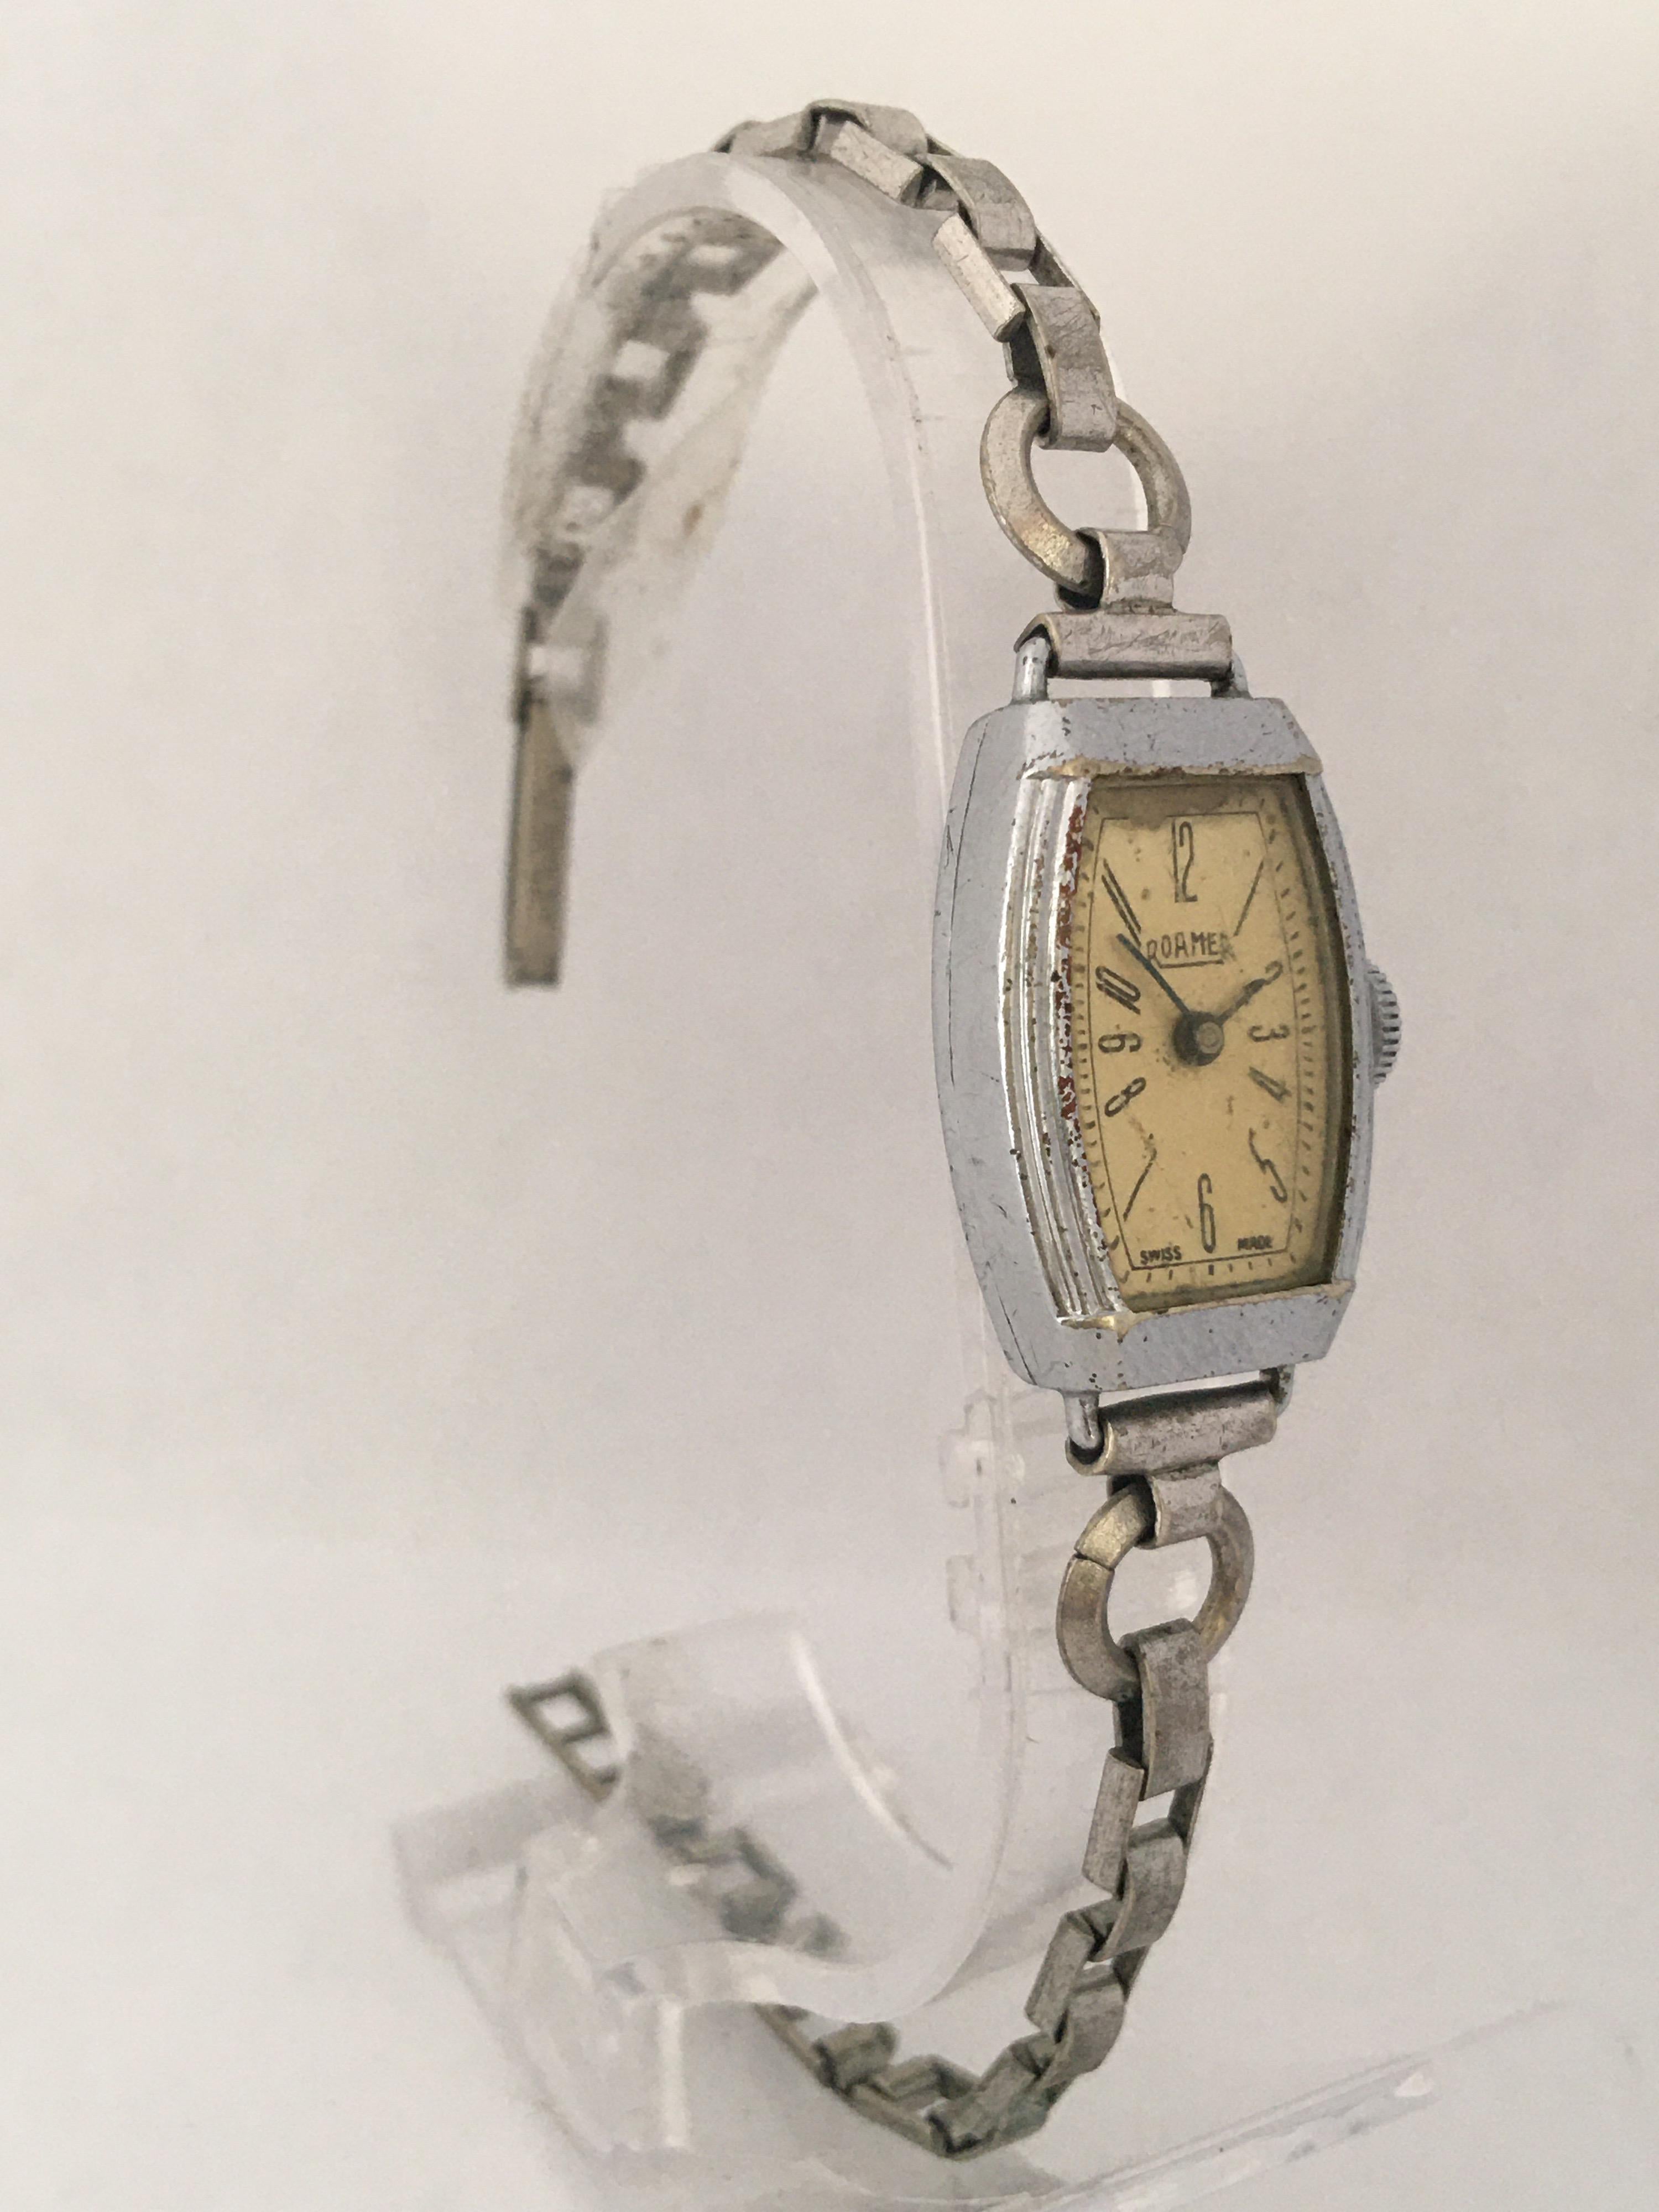 This beautiful vintage hand winding ladies watch is working and it is running well. Keeps a good time. Visible signs of ageing and wear with some scratches on the watch case and light scratches on the glass. The watch case is a bit tarnished as